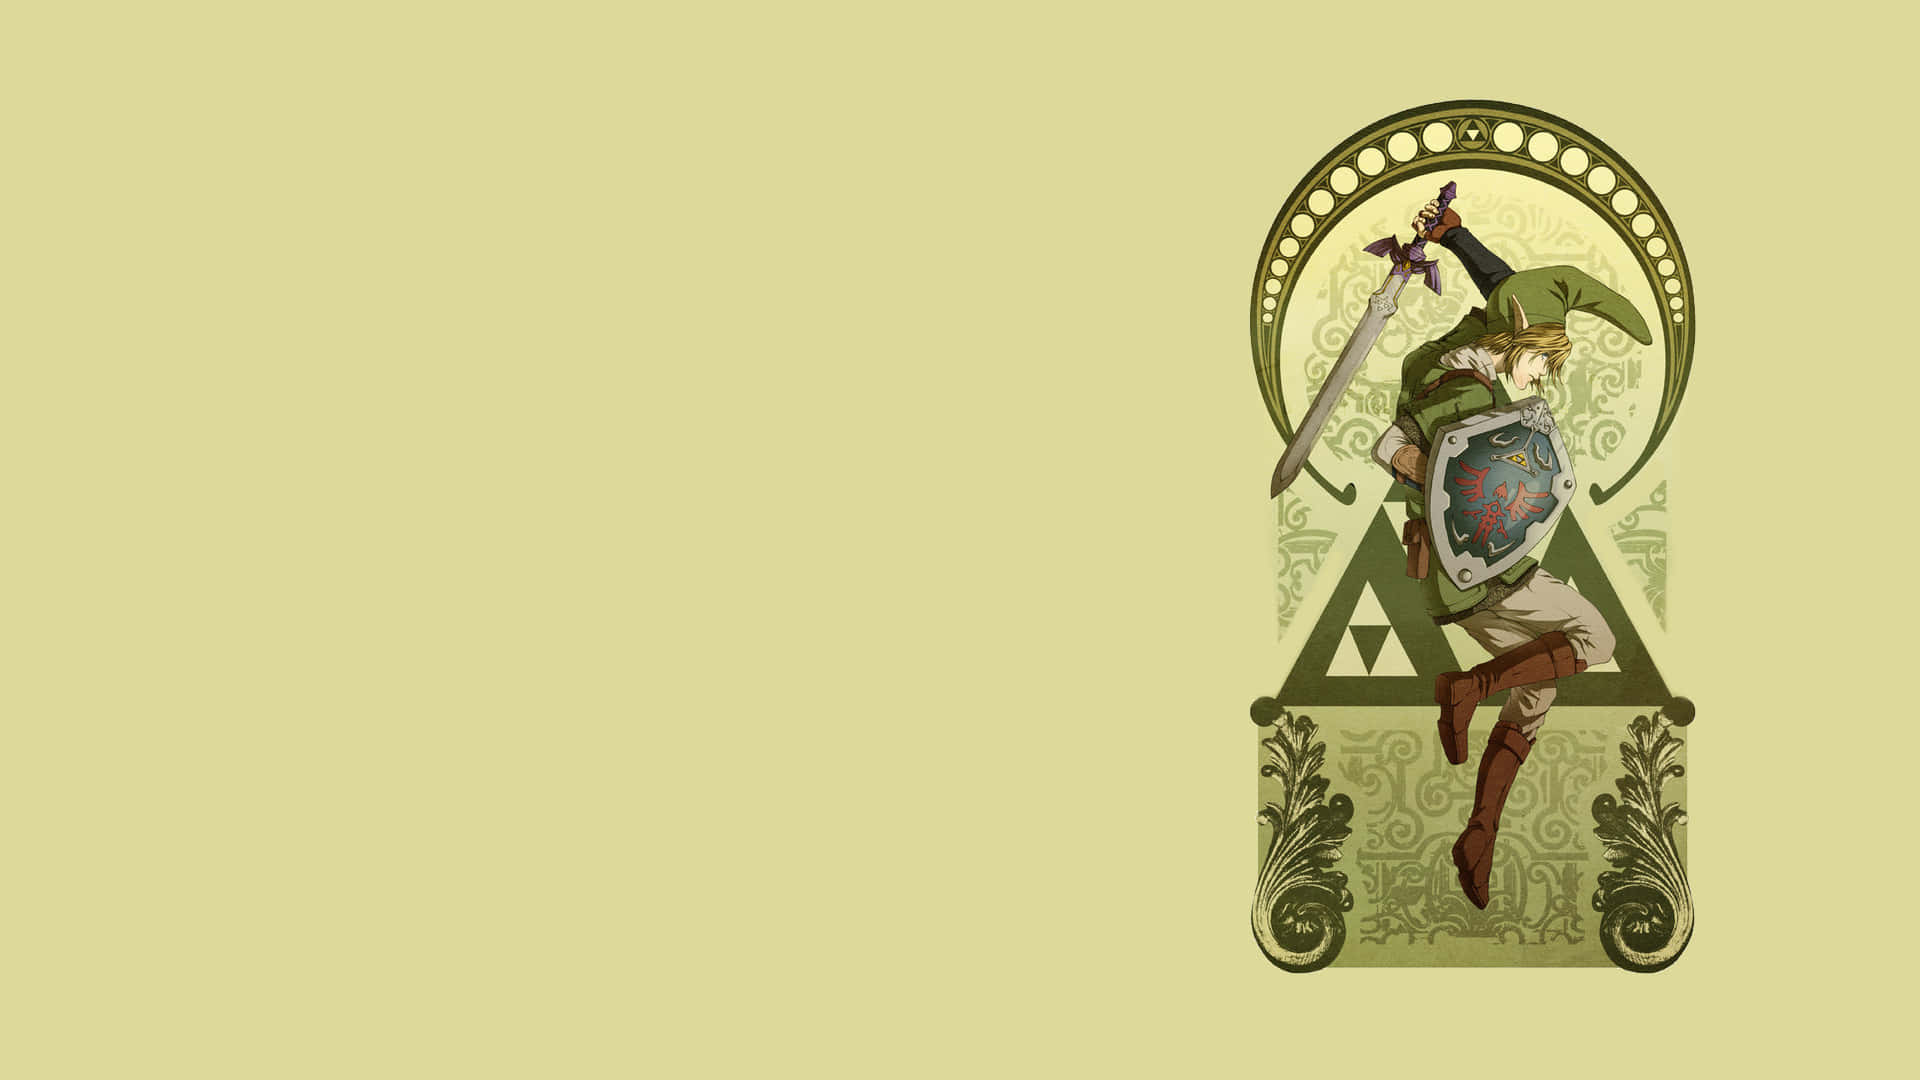 “The iconic Triforce symbol representing Power, Wisdom and Courage.” Wallpaper